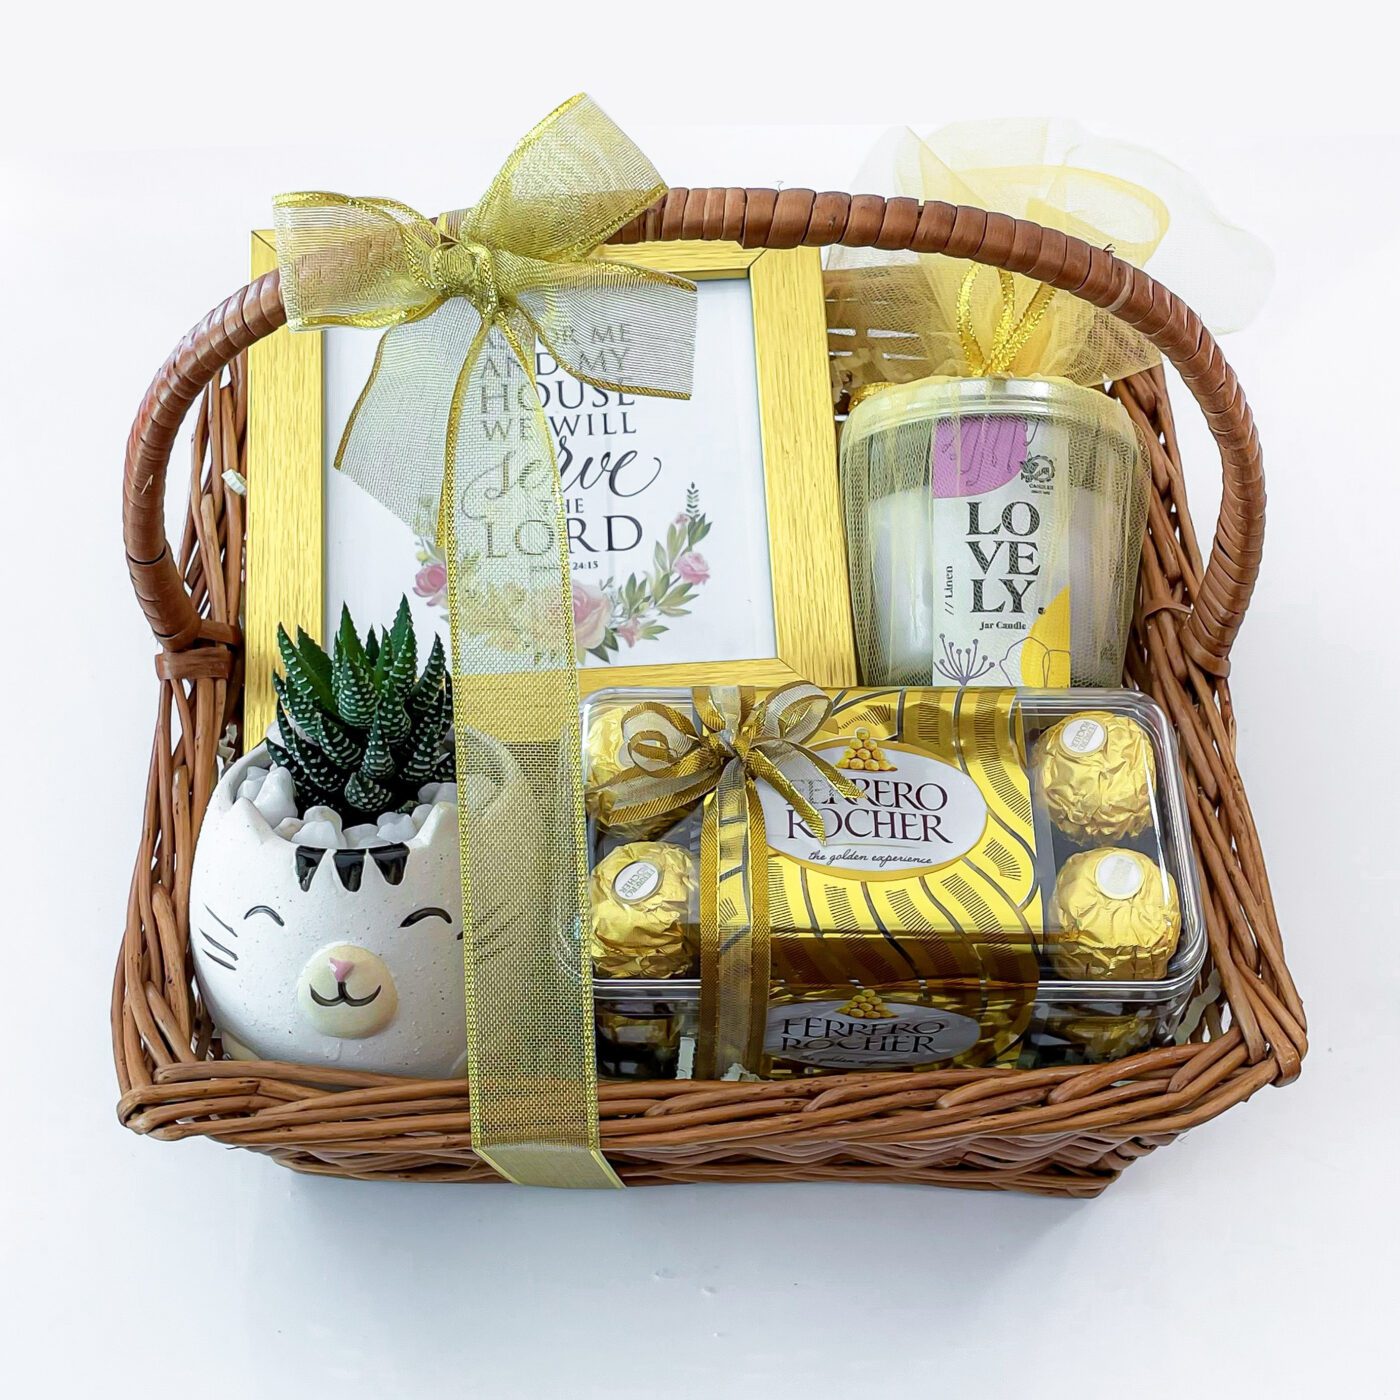 Return Gifts for House Warming | Fiber Gift Box Round Big